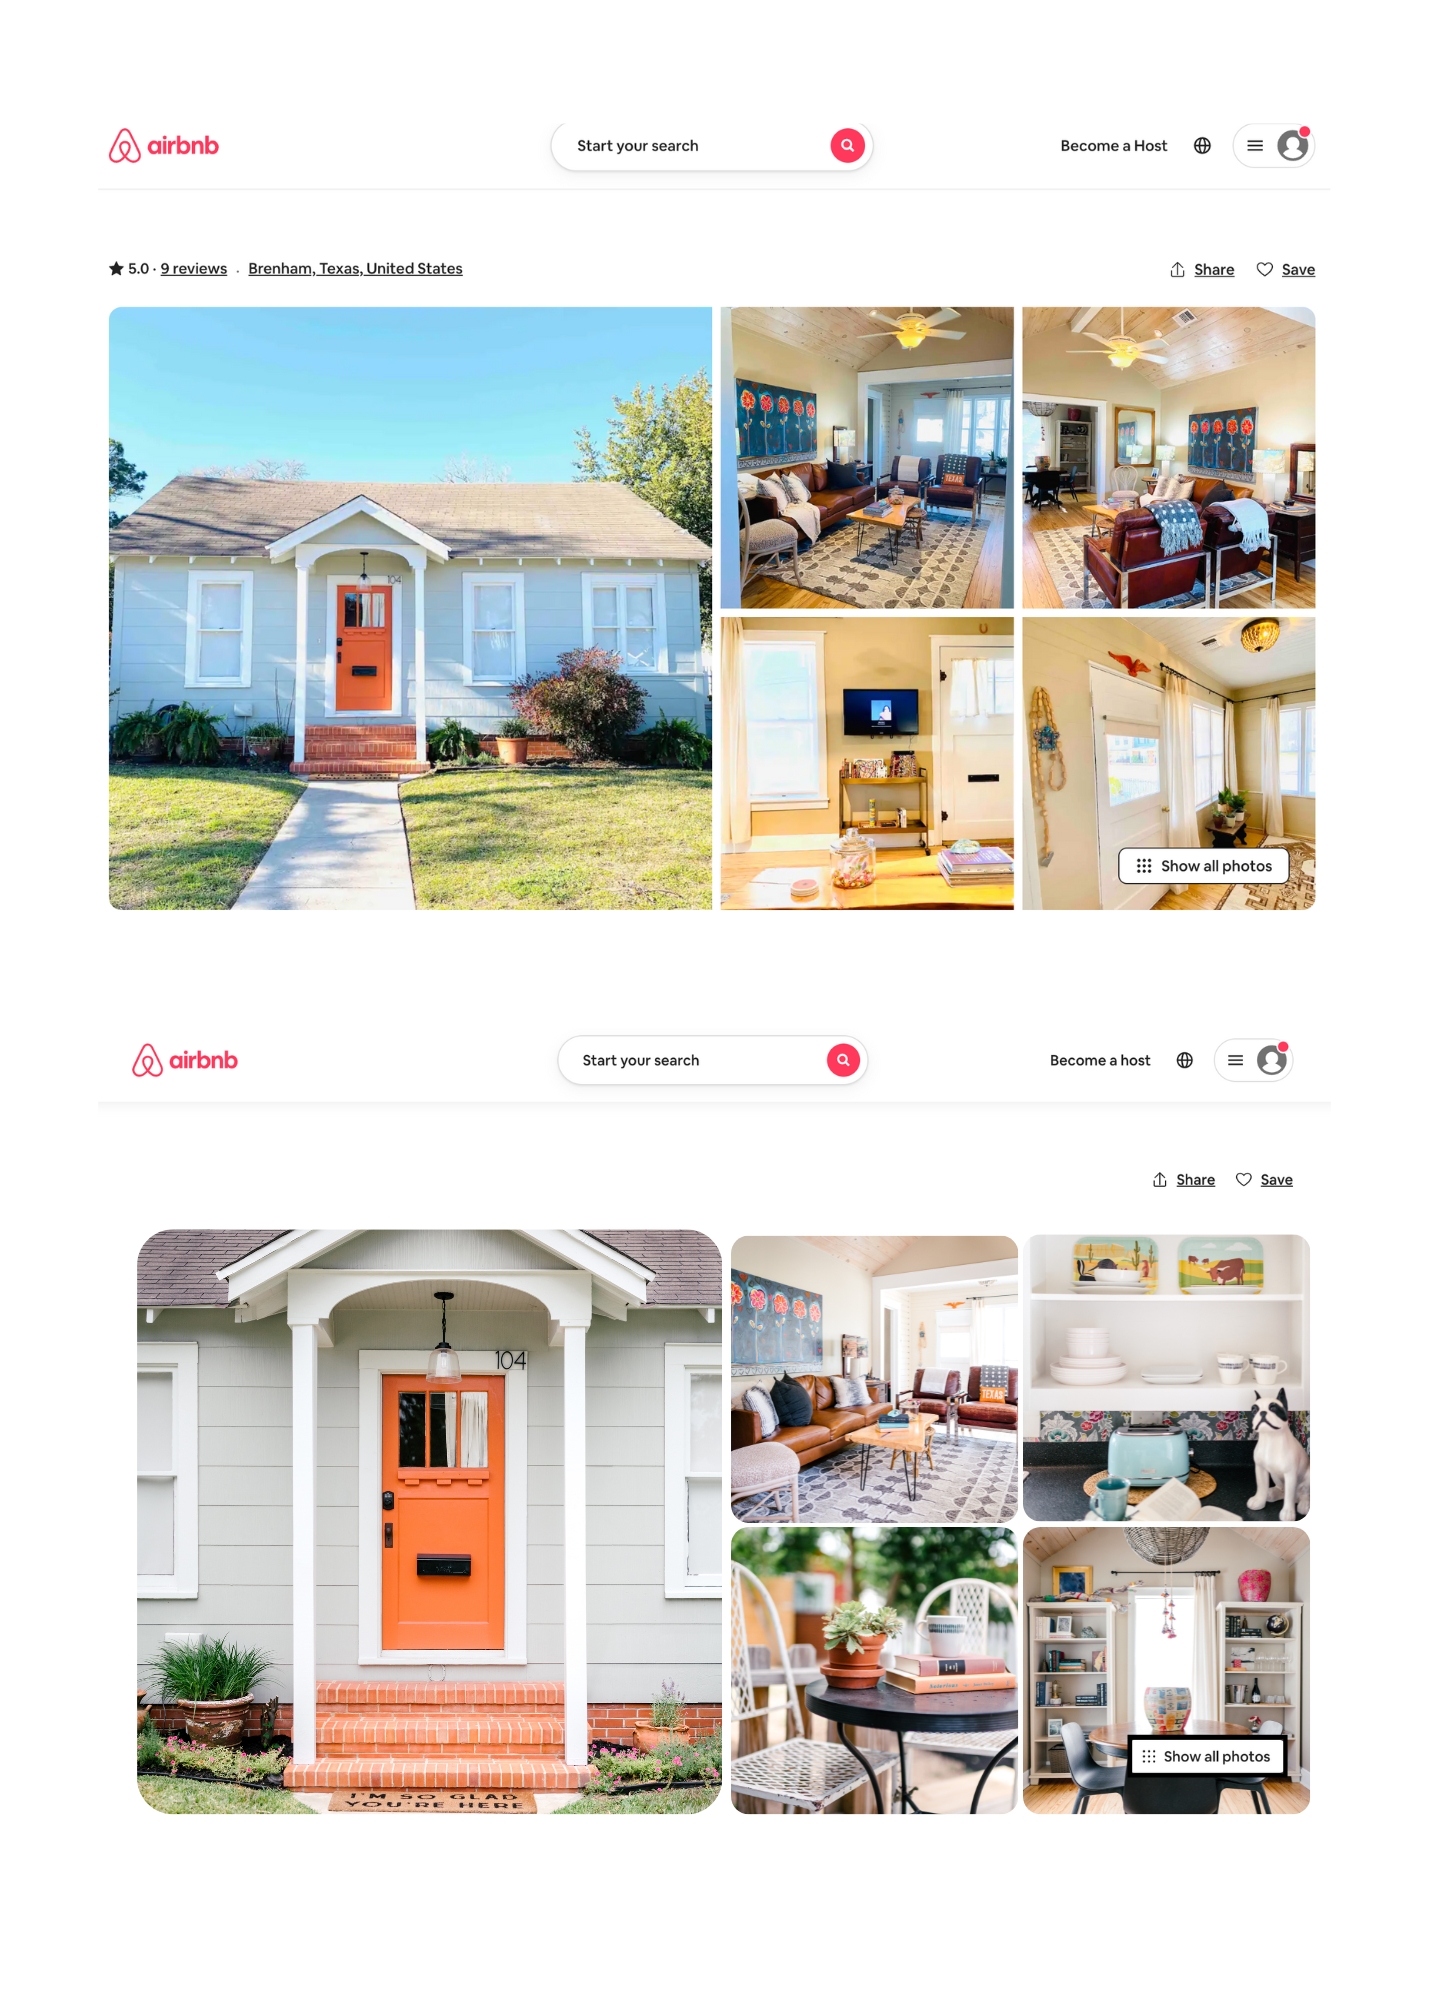 When you invest in a professional Airbnb photographer you are investing in growing your short term vacation rental through vacation rental photography